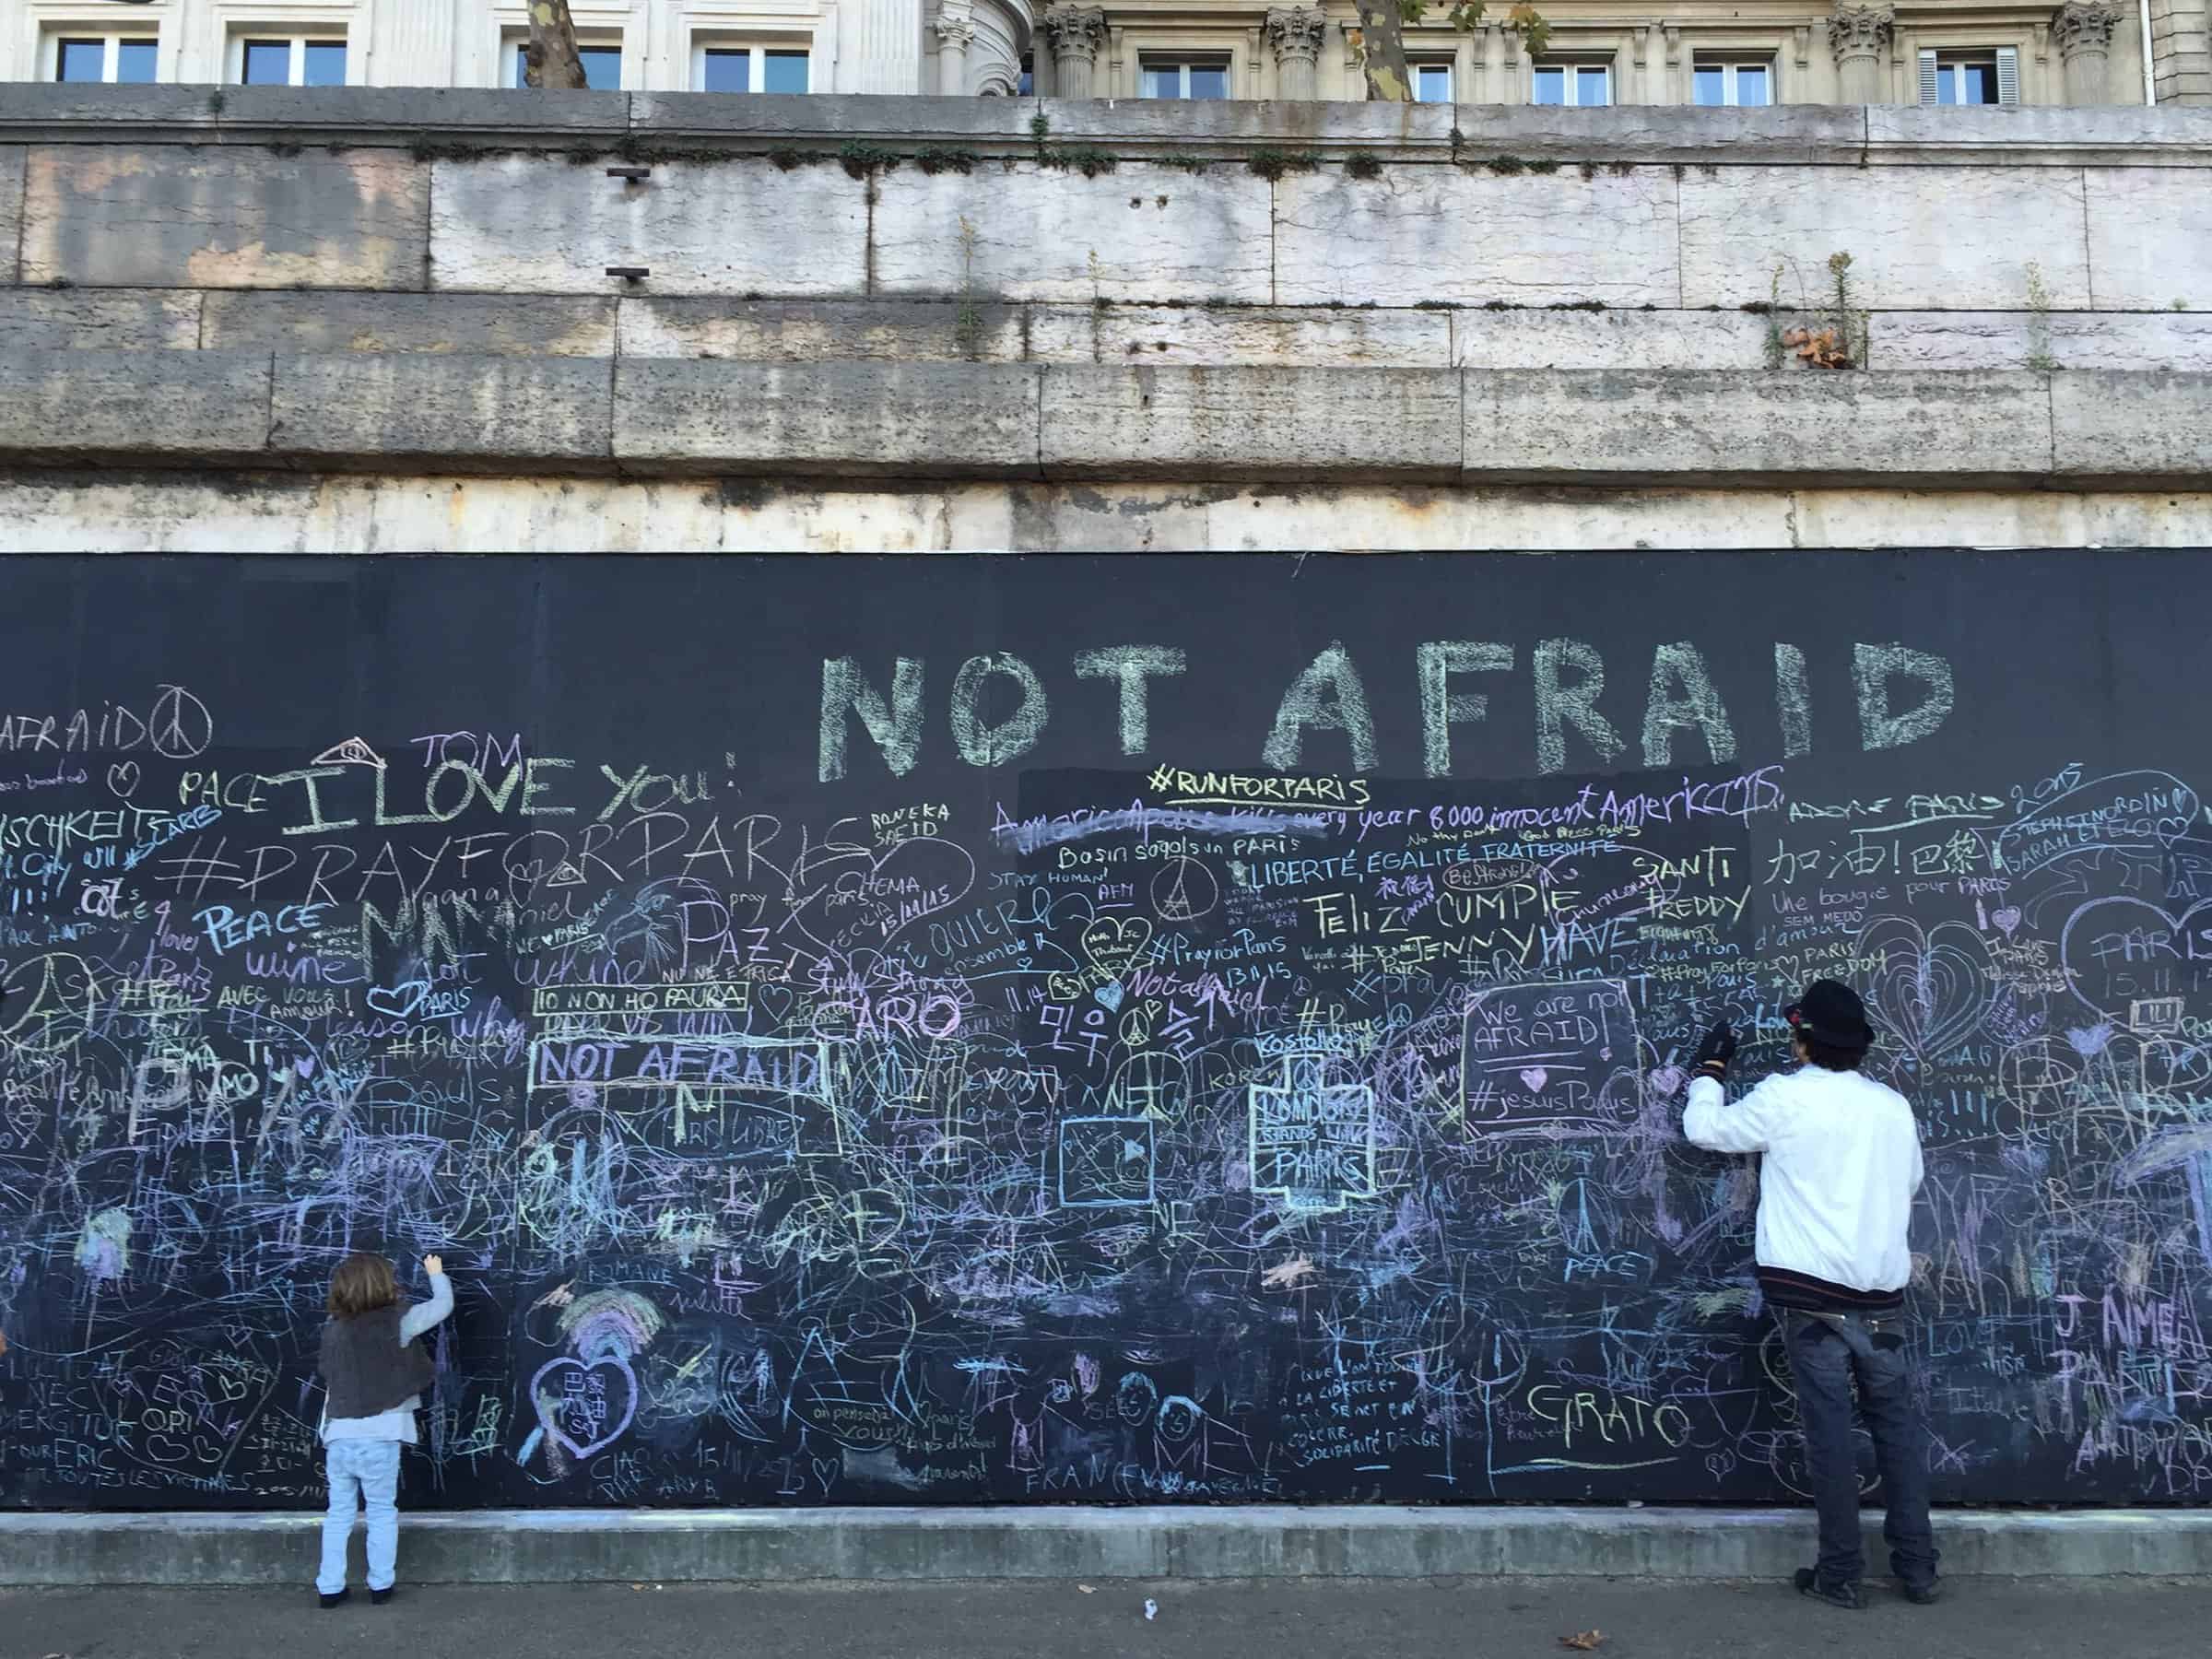 Paris after the attacks. Not Afraid. Seine river art and commemoration